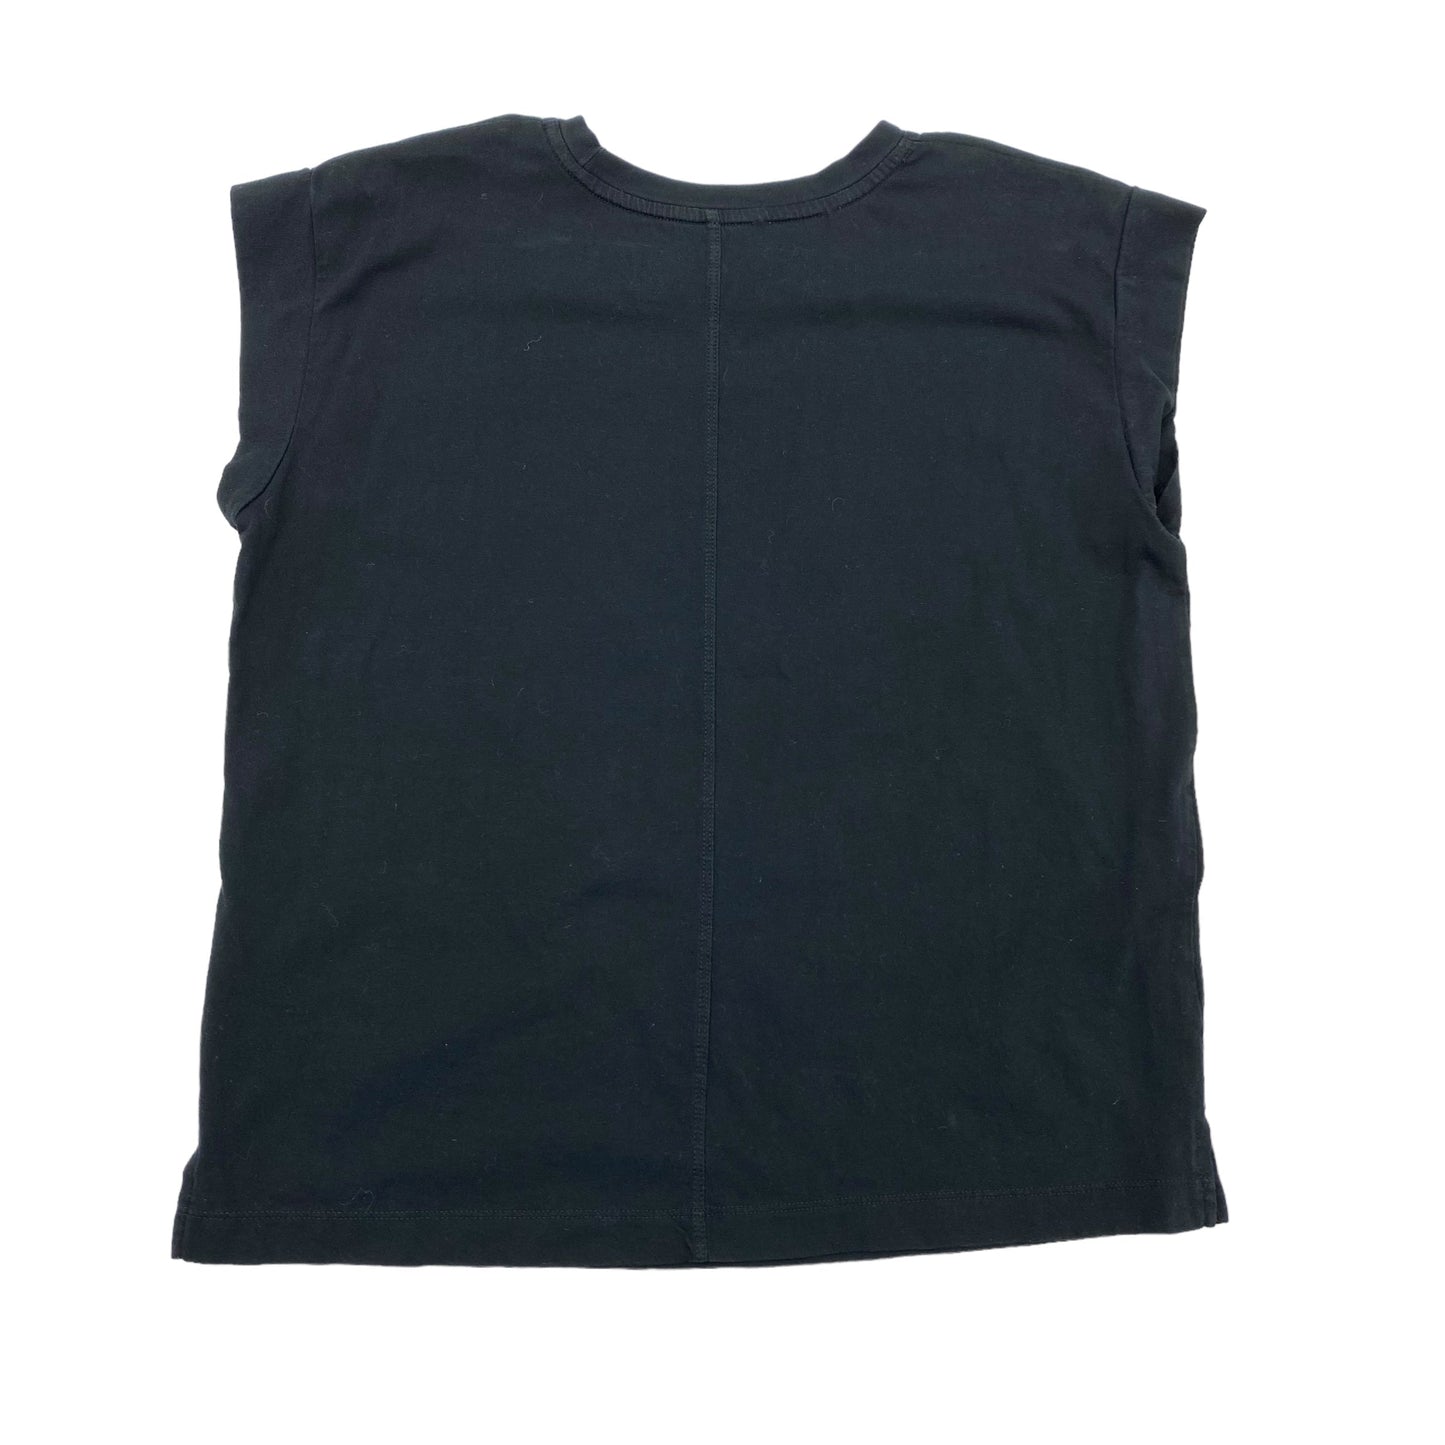 BLACK A NEW DAY TOP SS BASIC, Size S